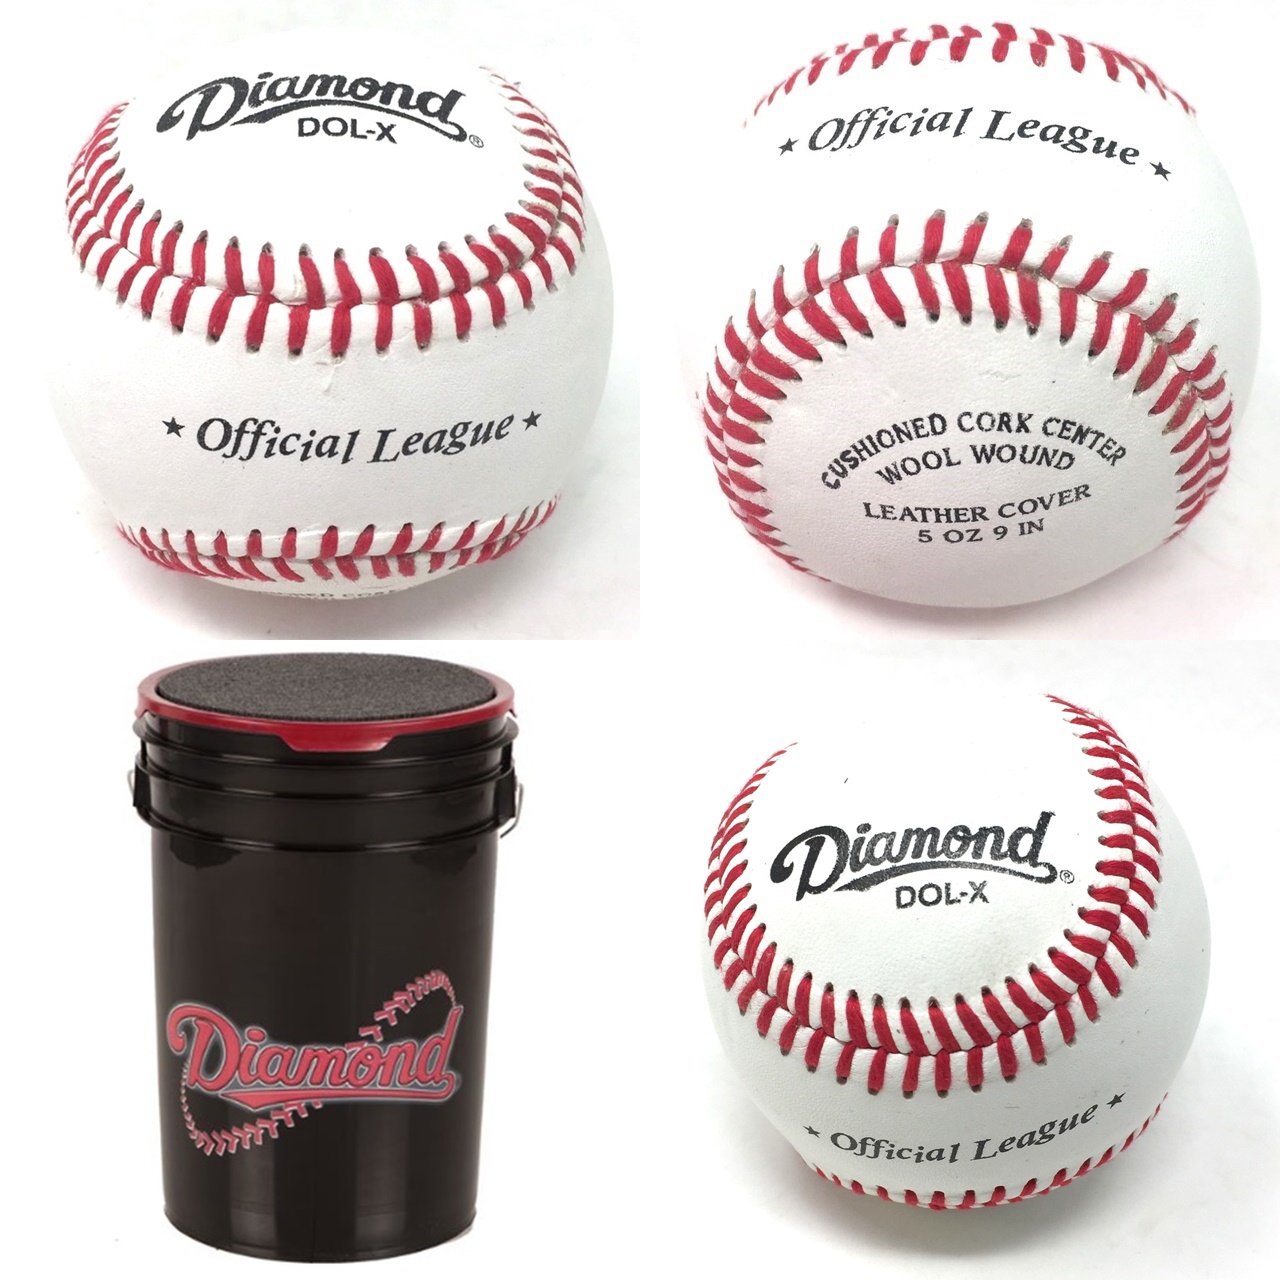 Diamond baseballs are the highest quality and most popular brand of baseballs for years. This bucket and 5 Dozen baseballs are great for practice, batting practice, or any other baseball use. Full leather cover and high quality, just minor blem cosmetics you don't even notice when hitting batting practice or tee work.